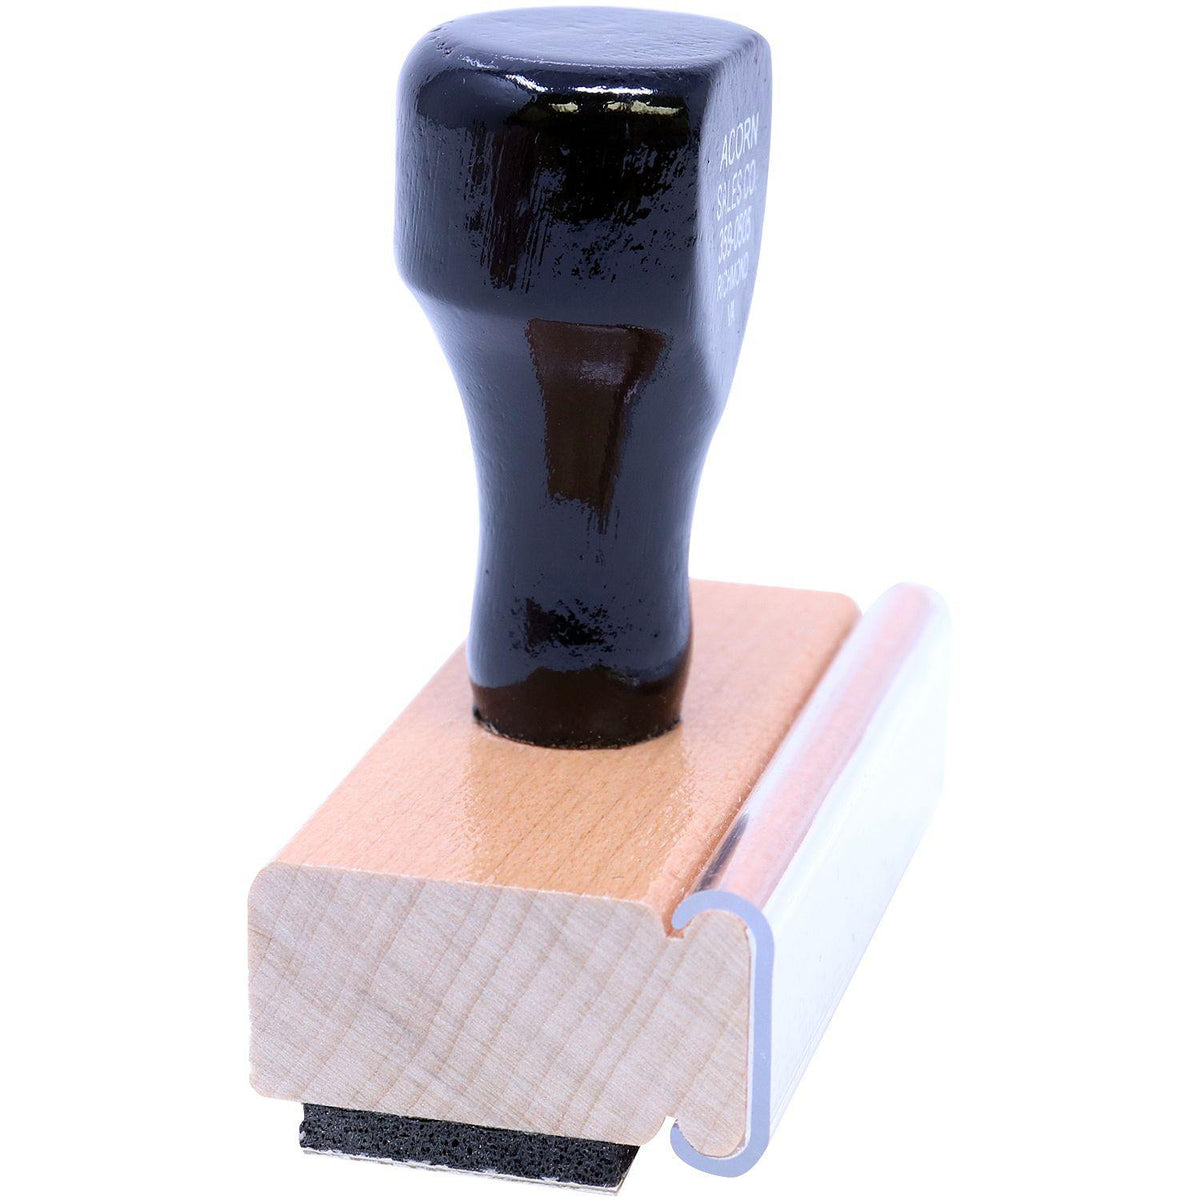 Side View of Have a Happy Day Rubber Stamp at an Angle